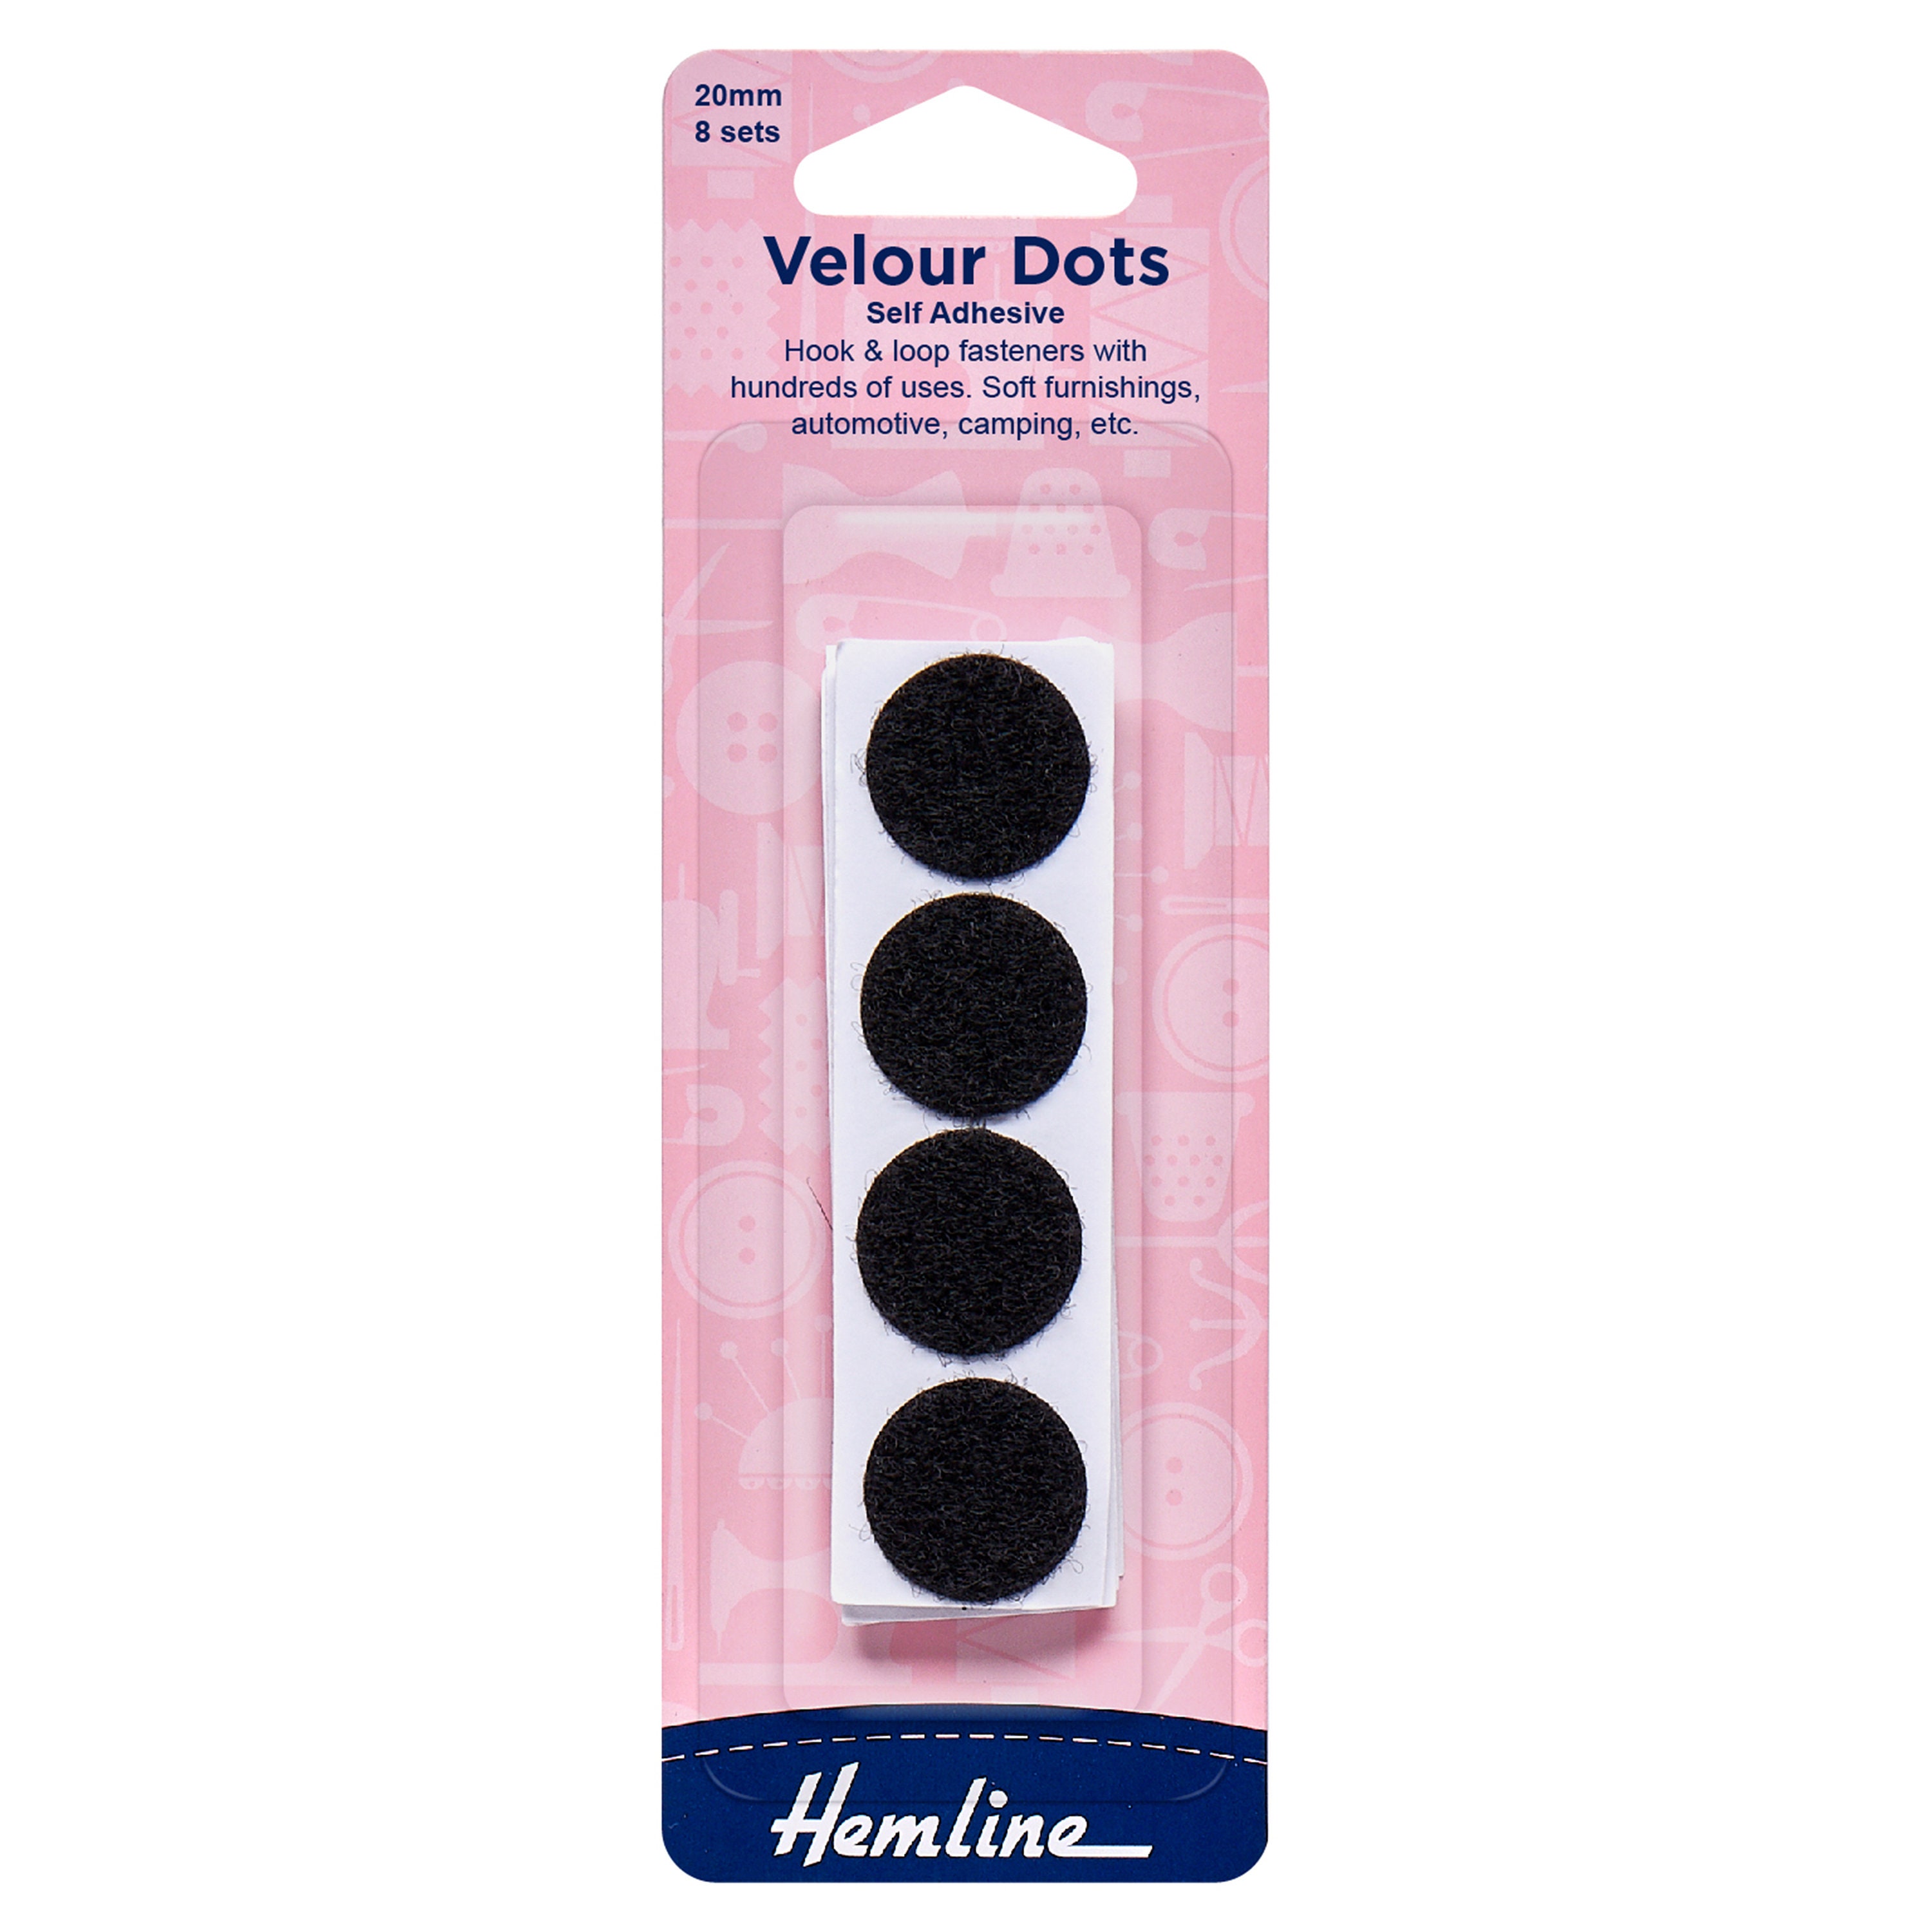 VELCRO Brand Adhesive Dots Black | 500 Pk 3/4 Circles Sticky Back Round  Hook and Loop for Office Organization, Arts and Crafts, School Projects